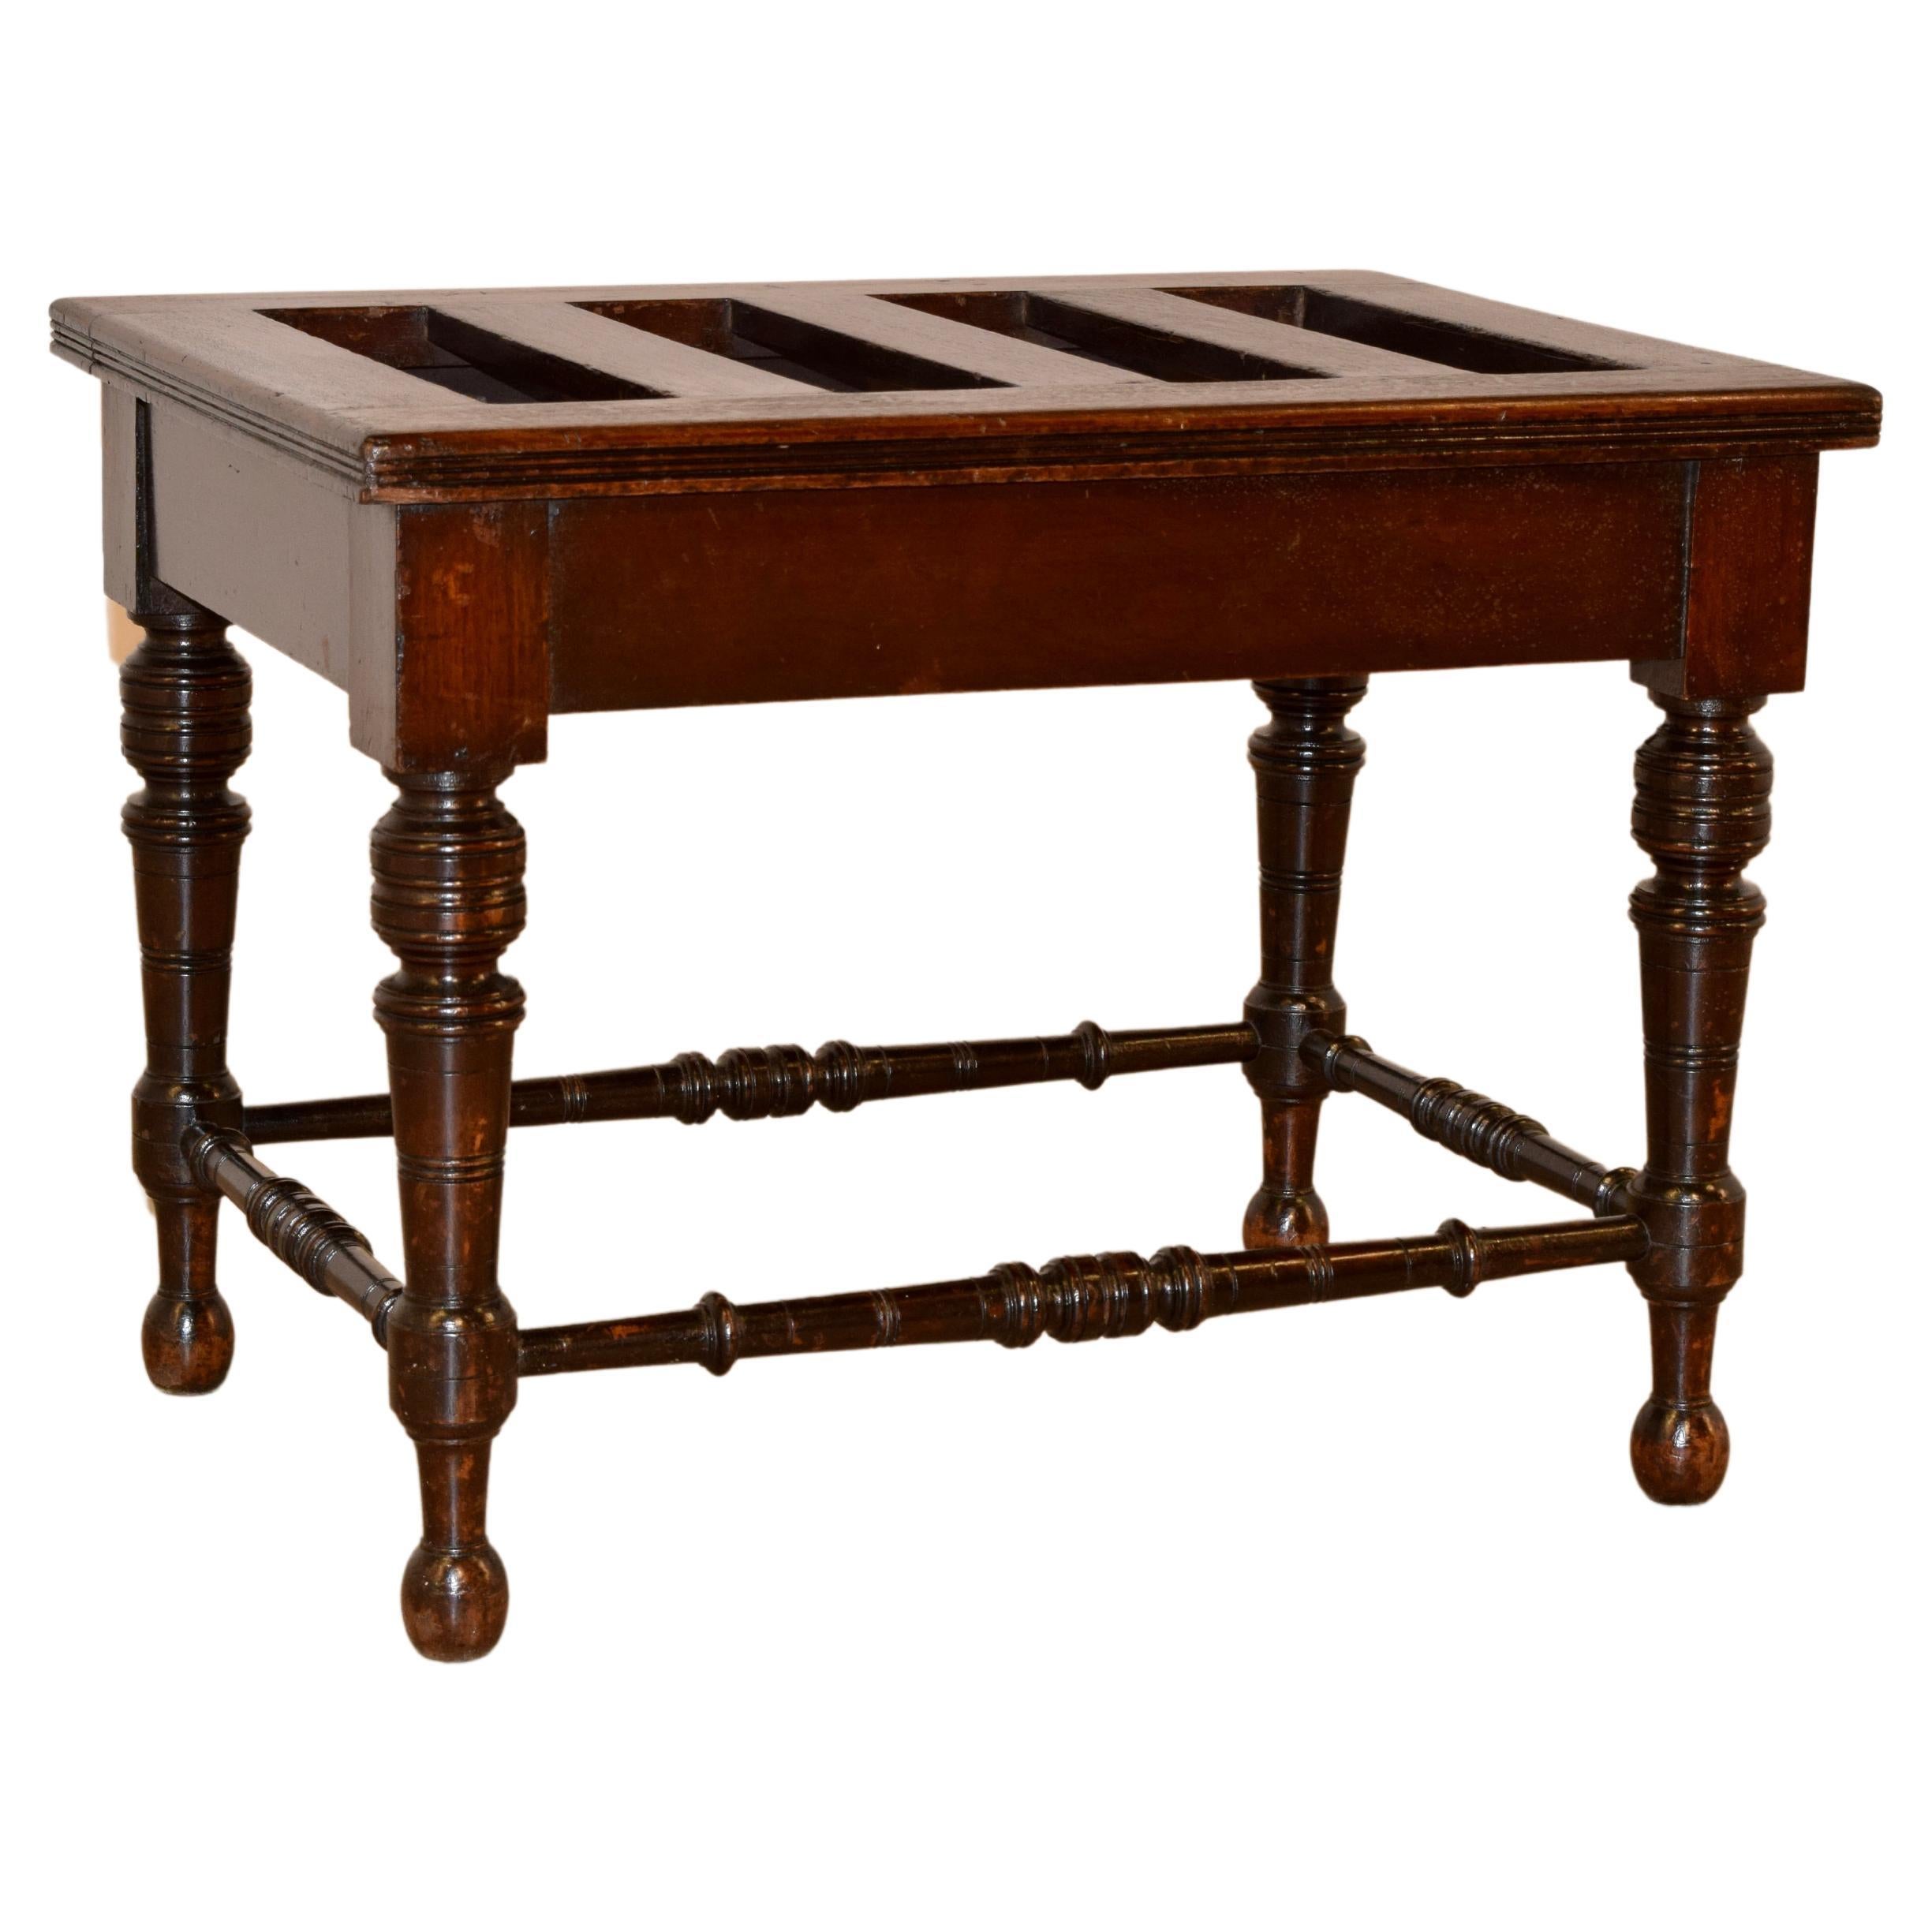 19th Century English Mahogany Luggage Stand For Sale